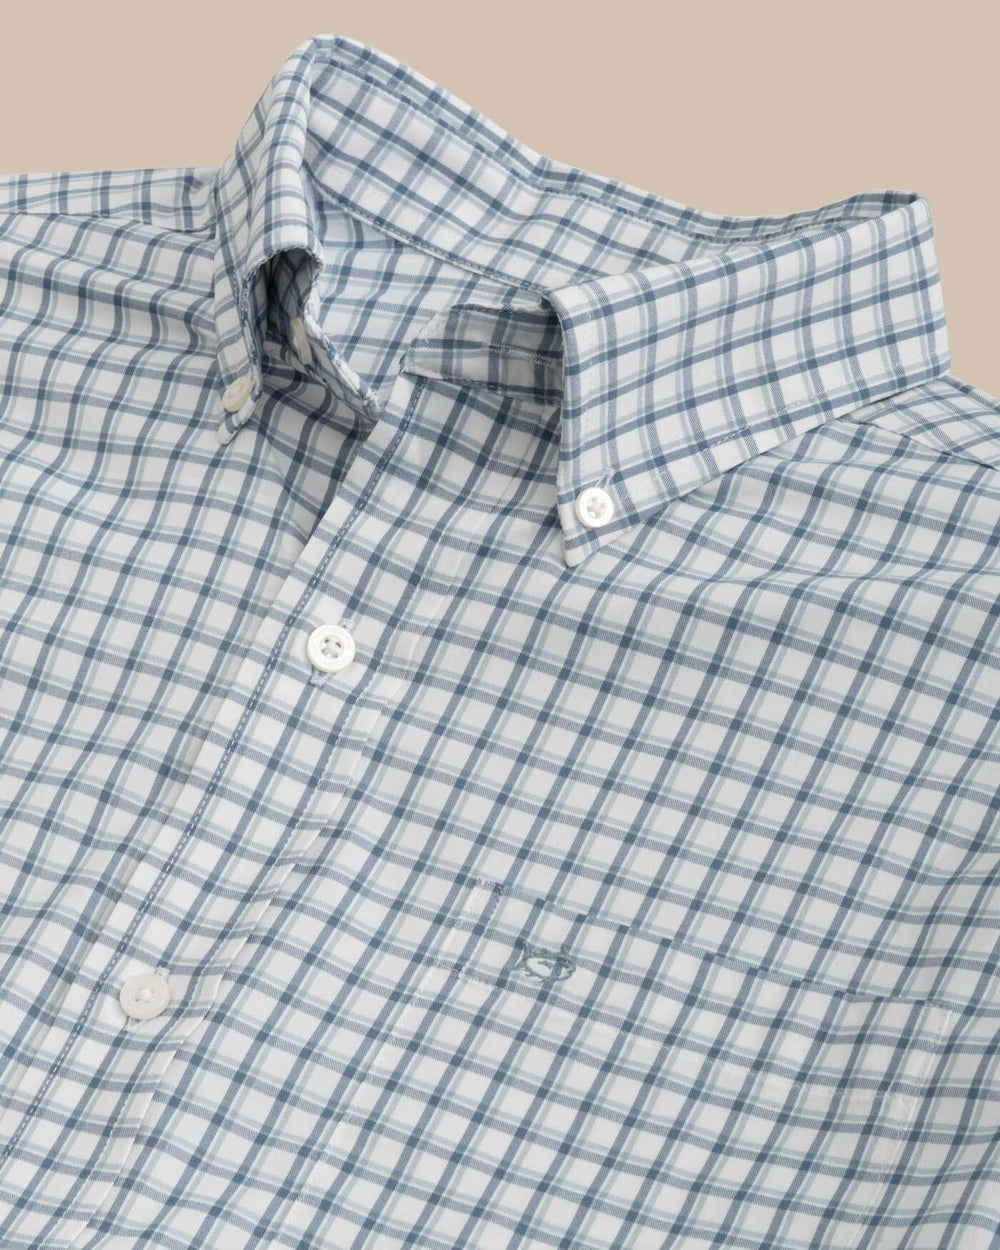 The detail view of the Southern Tide Bellevue Plaid Sport Shirt by Southern Tide - Blue Haze